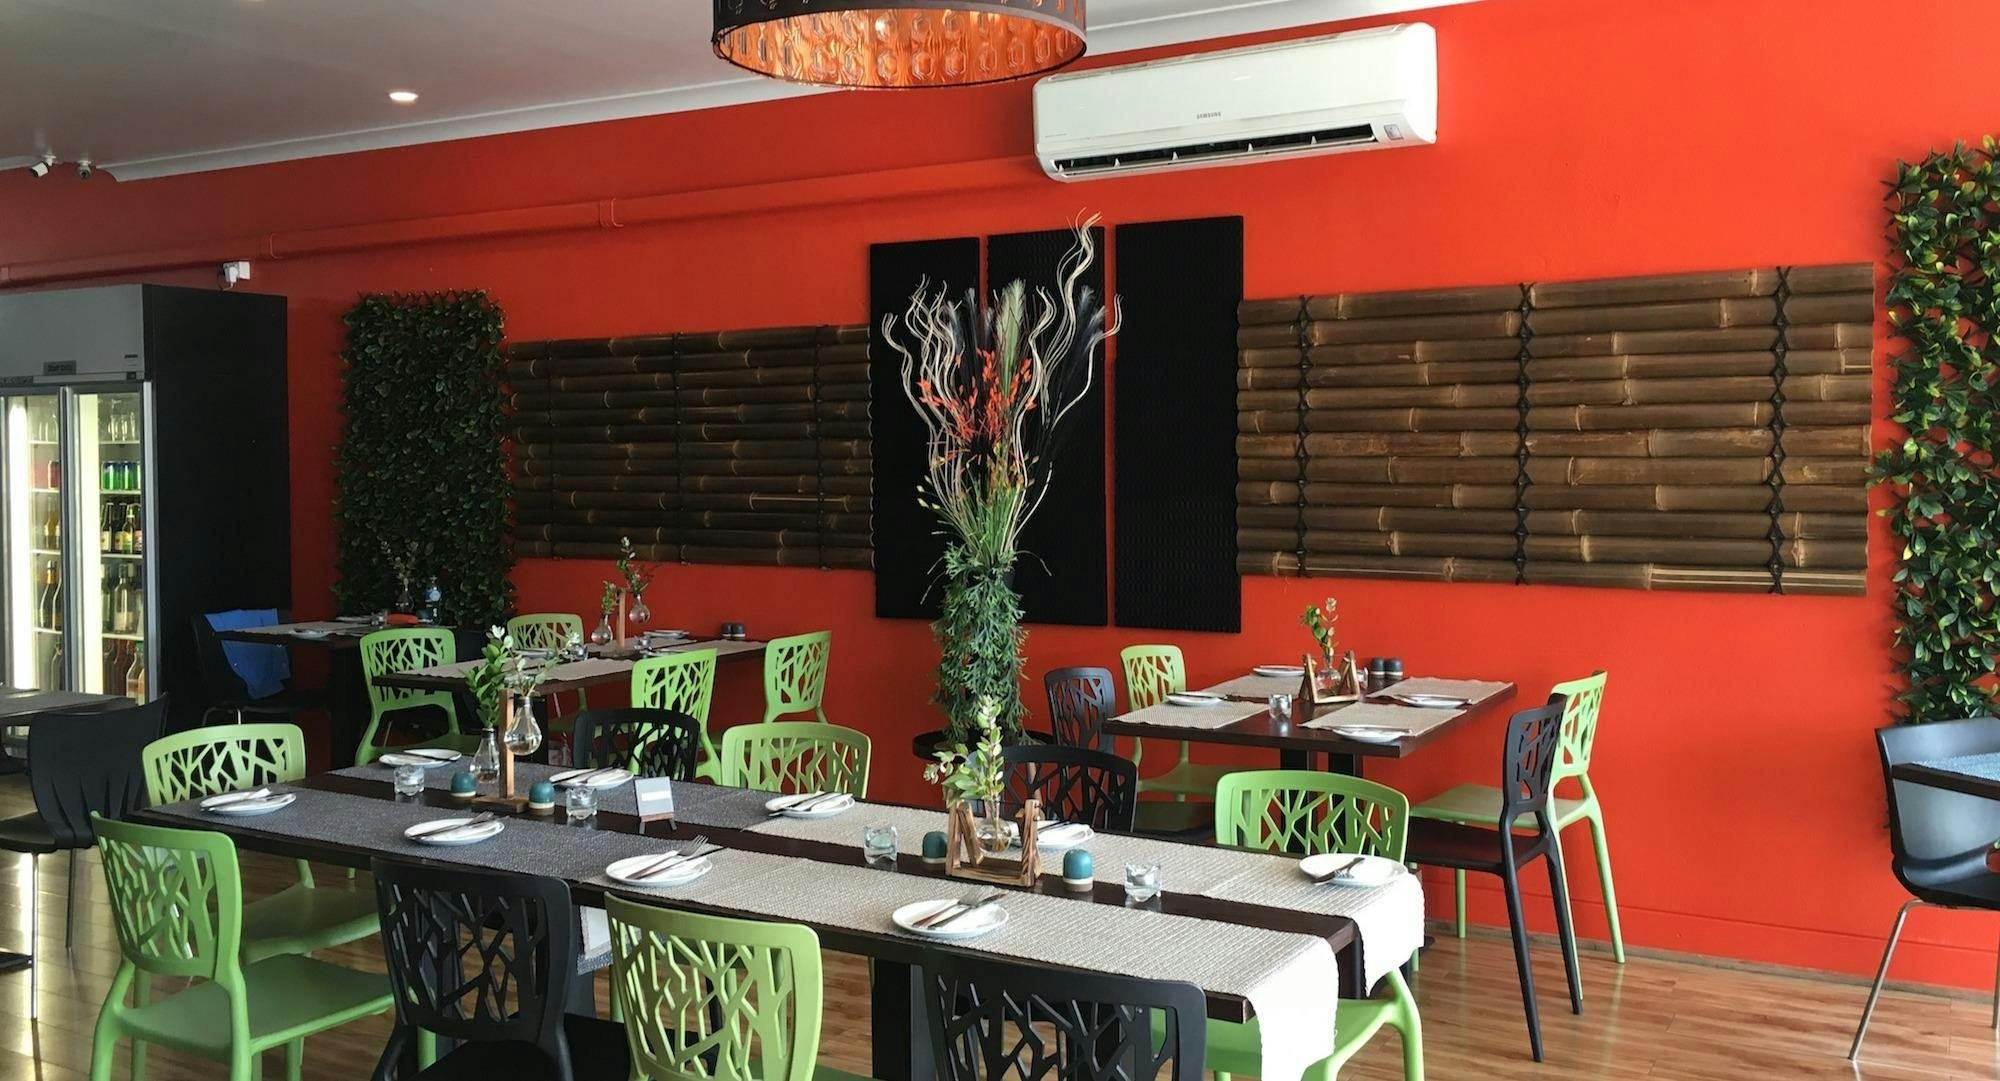 Photo of restaurant Cafe Relish in Doubleview, Perth